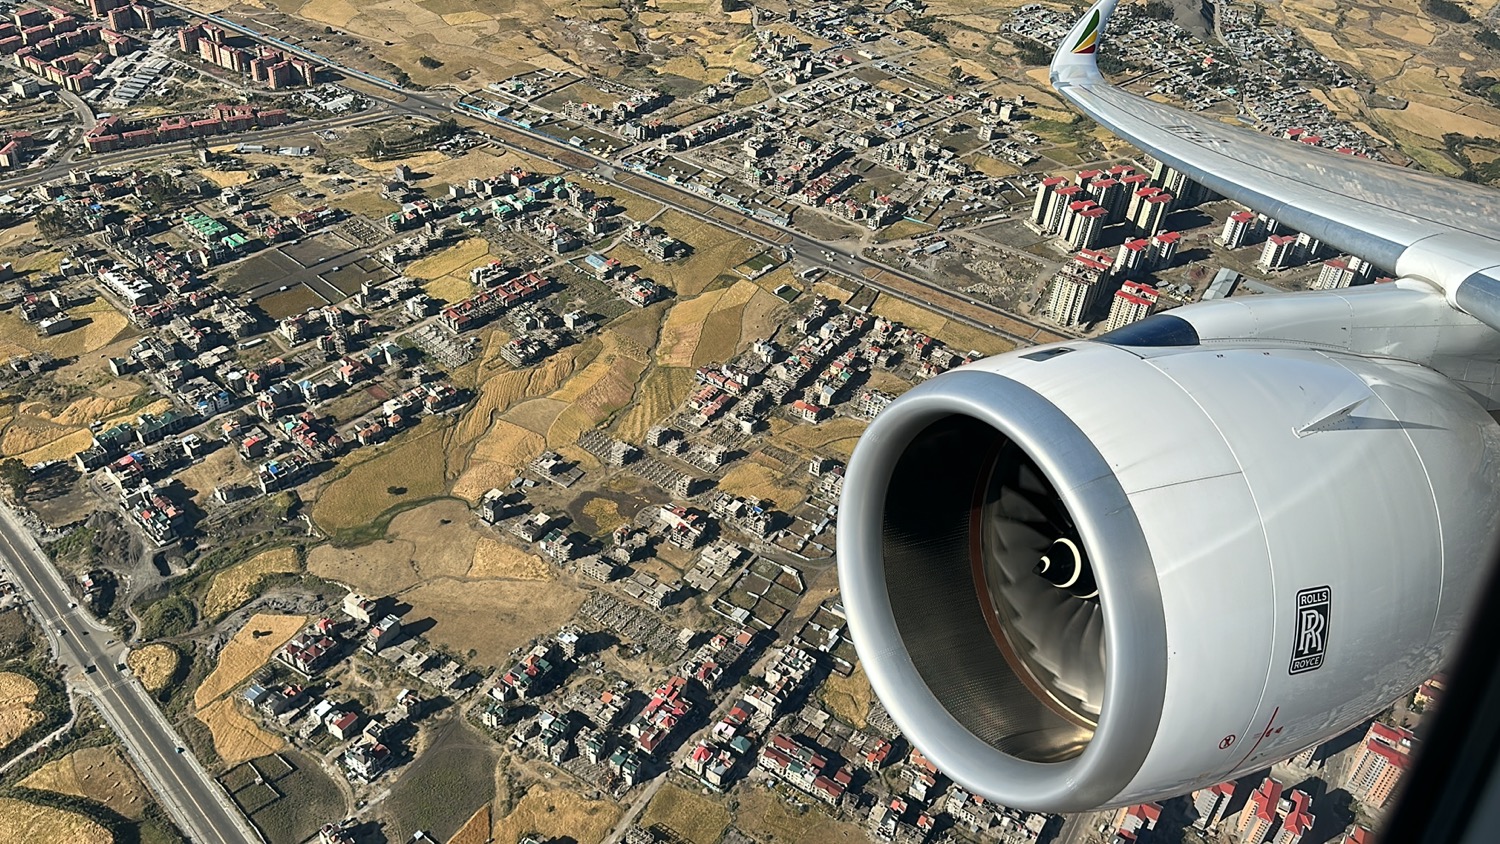 an airplane wing and engine of a city